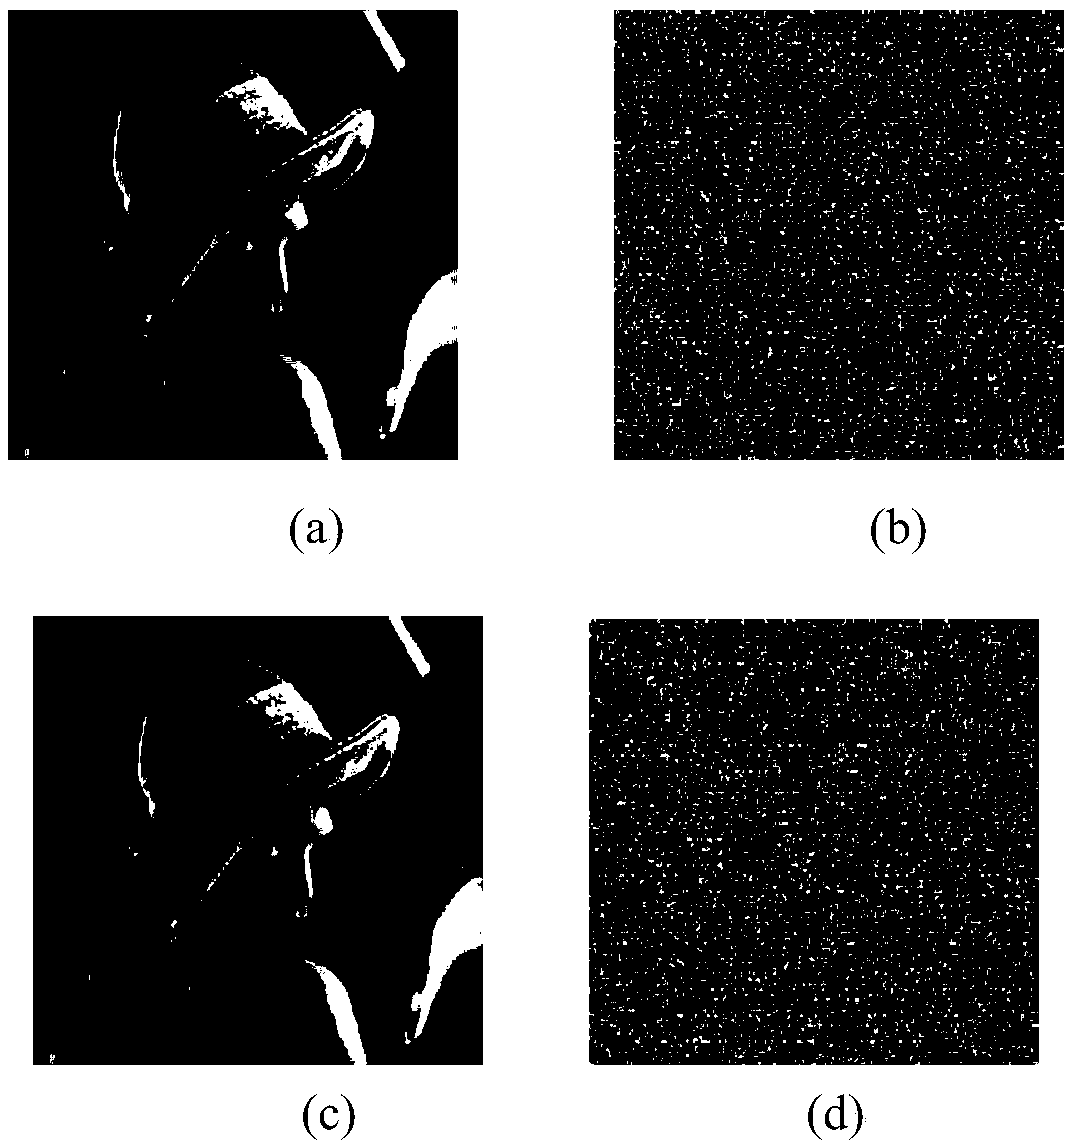 An image encryption method based on four-dimensional Chen's hyperchaotic system and K-means clustering